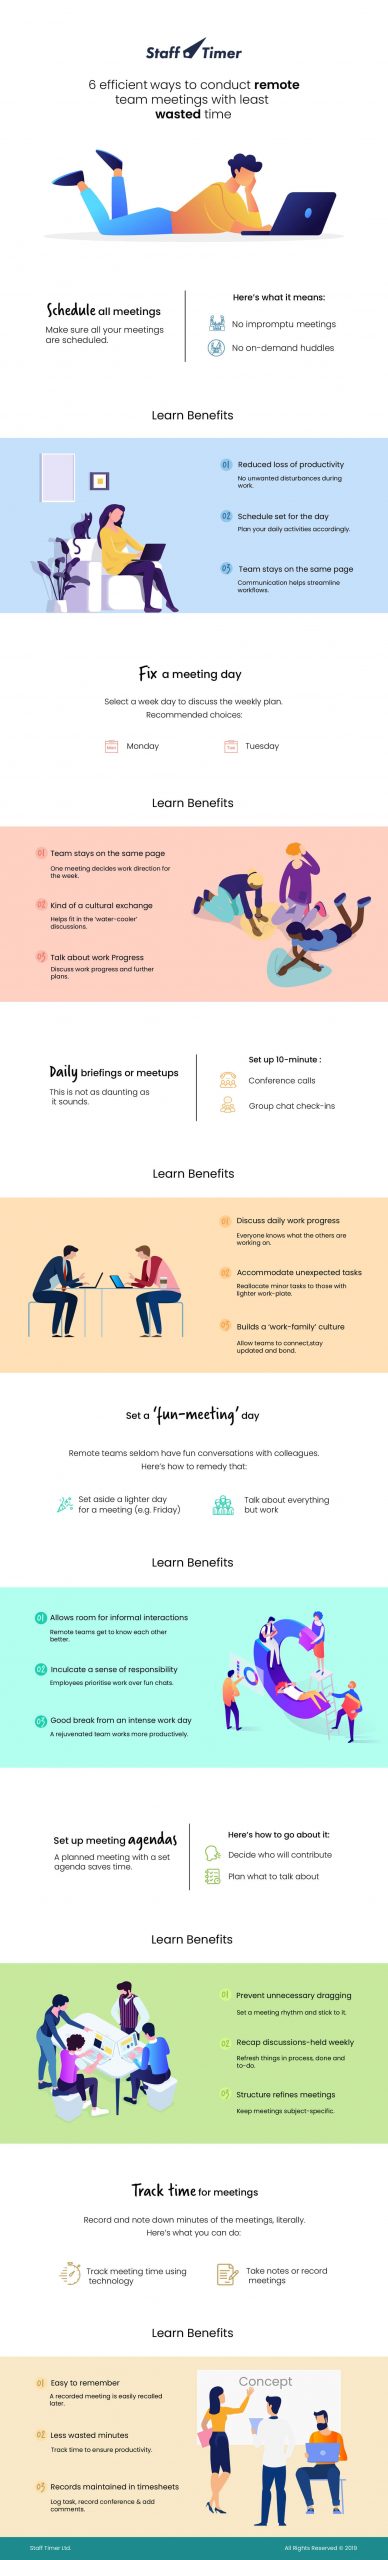 Infographics on how to conduct remote meetings